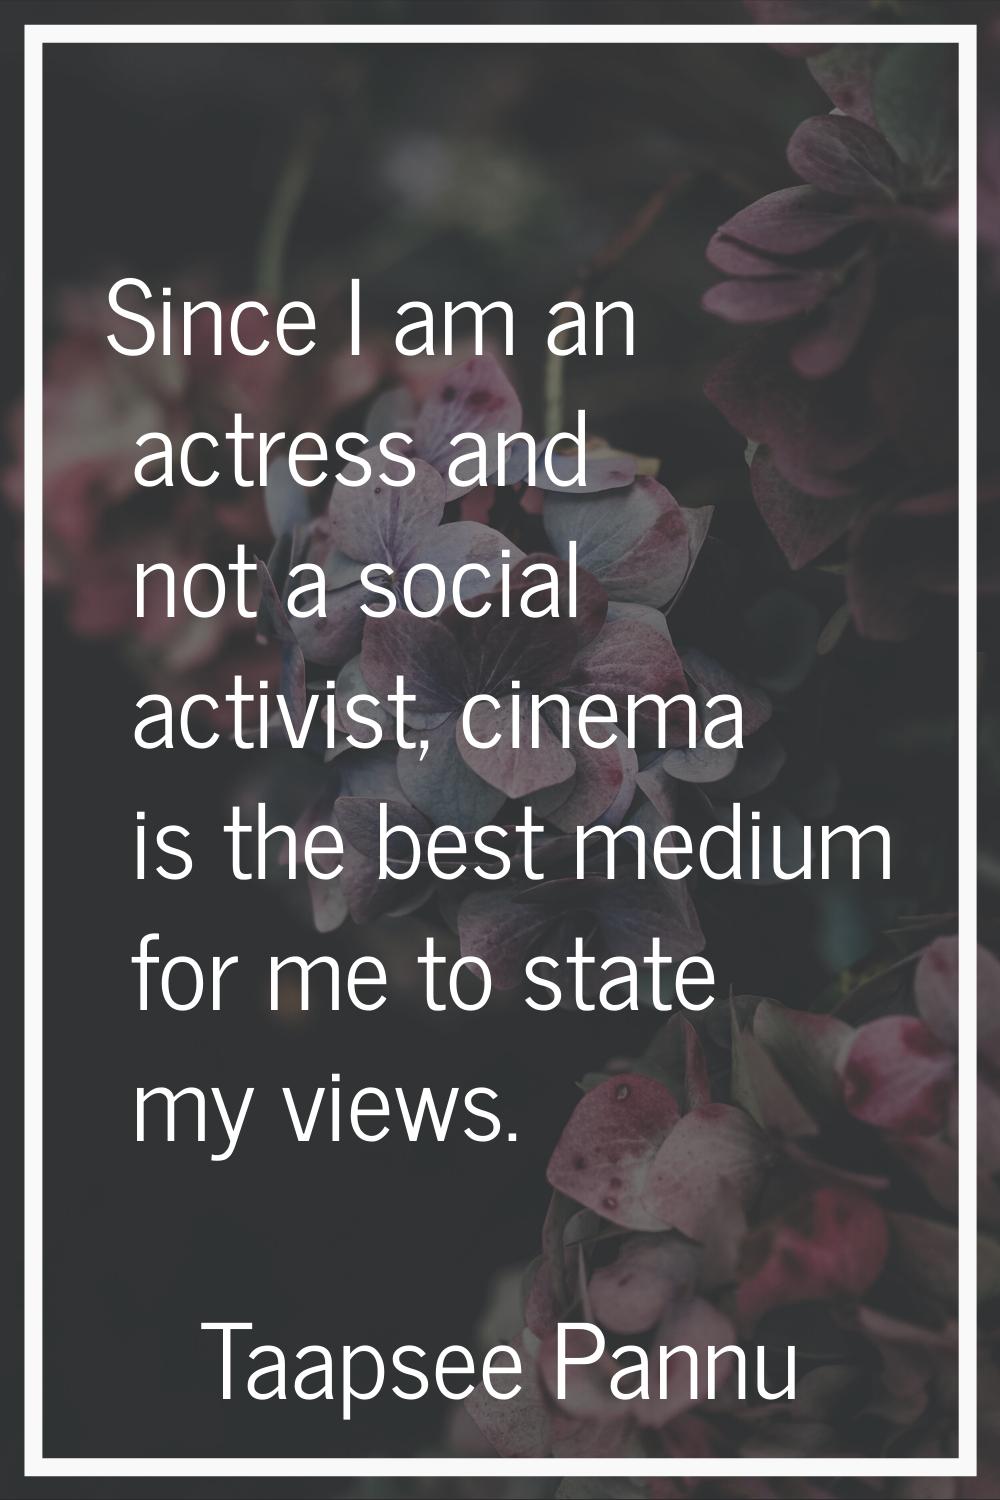 Since I am an actress and not a social activist, cinema is the best medium for me to state my views